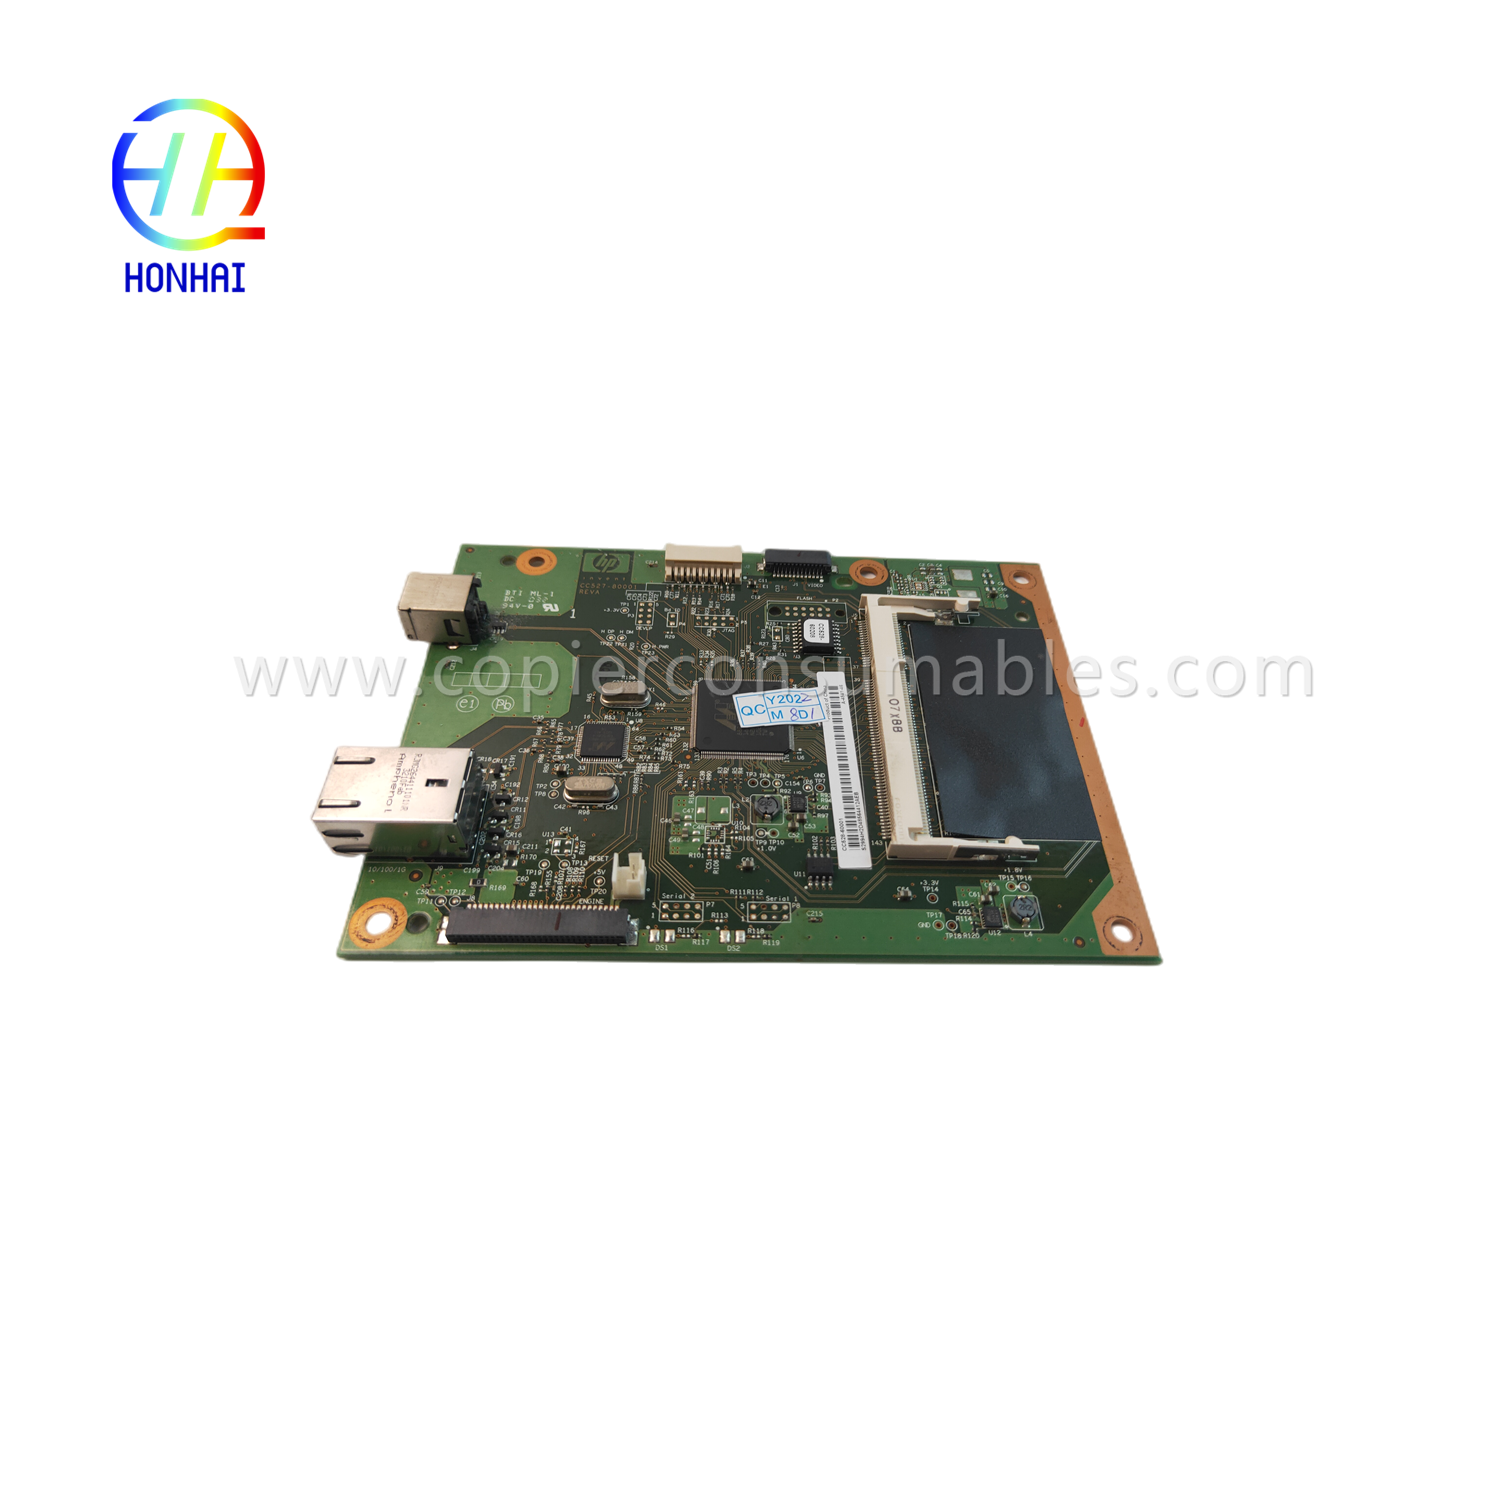 https://www.copierconsumables.com/formatter-board-assembly-for-hp-cc528-60001-para-laserjet-p2055dn-mainboard-product/